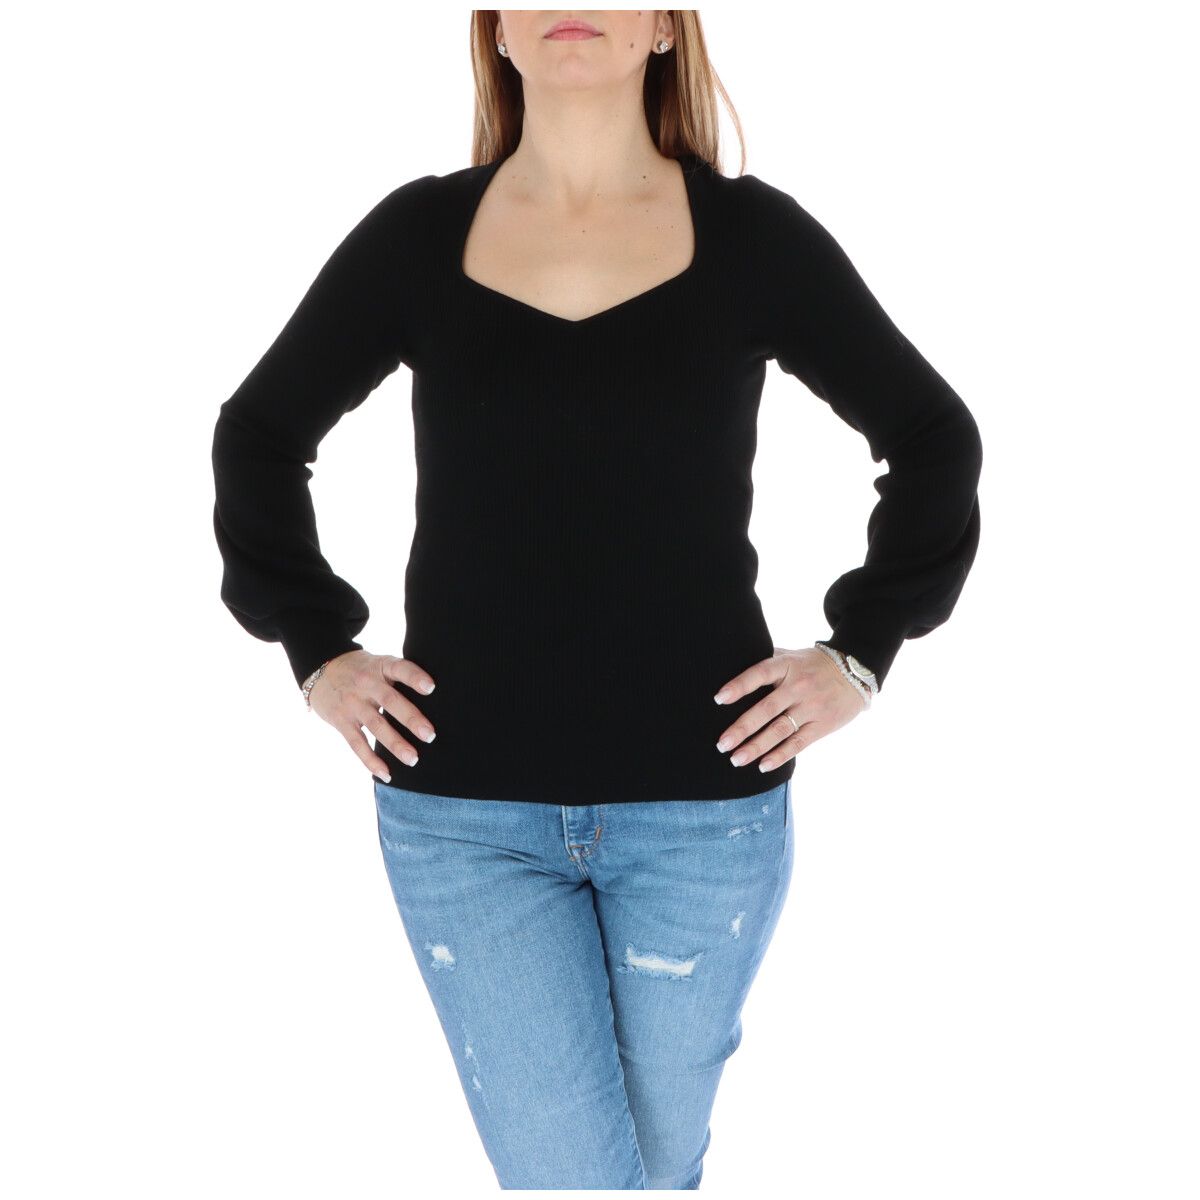 Brand: Pinko
Gender: Women
Type: Knitwear
Season: Fall/Winter

PRODUCT DETAIL
• Color: black
• Sleeves: long
• Neckline: v-neck
•  Article code: 1G155U Y6D1

COMPOSITION AND MATERIAL
• Composition: -41% acrylic -2% elastane -41% wool -16% polyamide 
•  Washing: machine wash at 30°